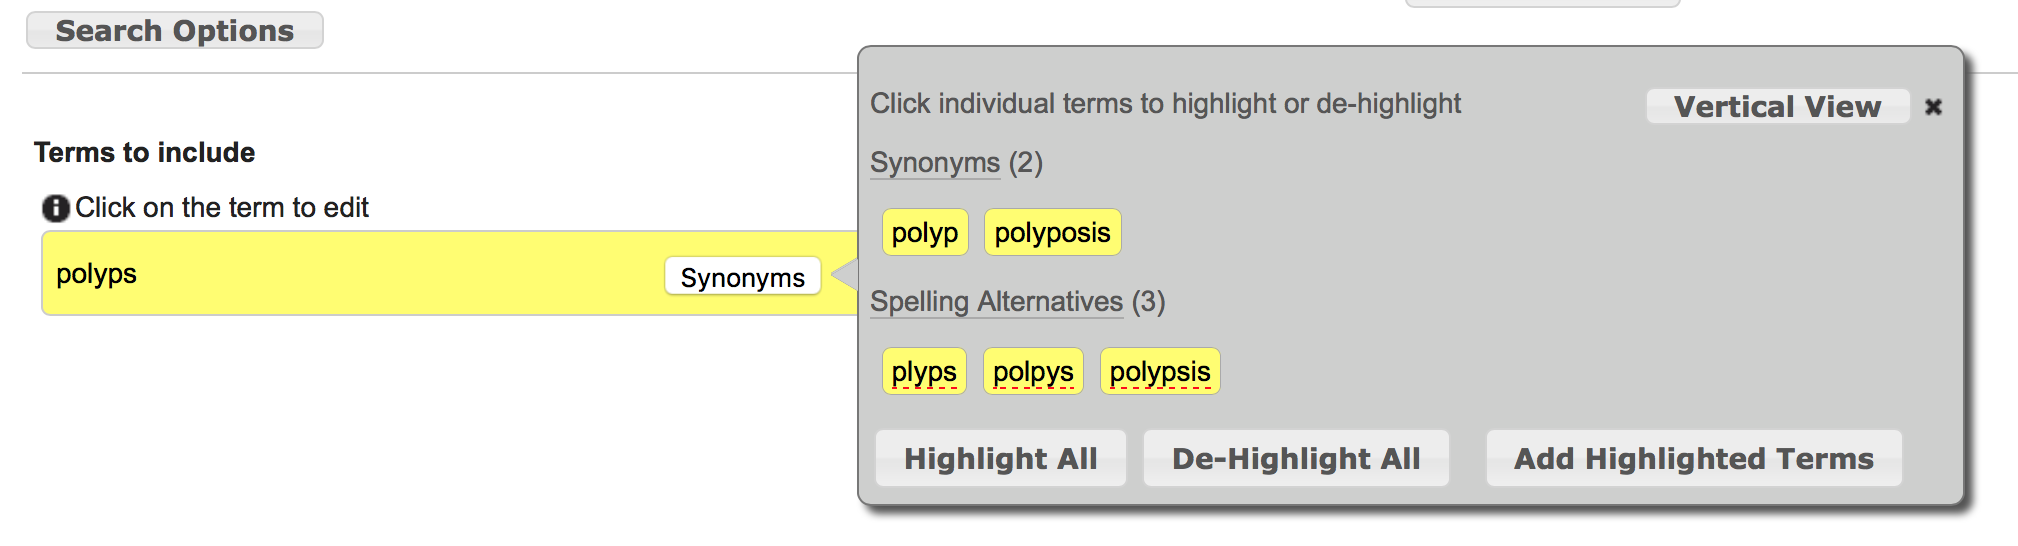 Synonyms suggestions display for the term Polyps